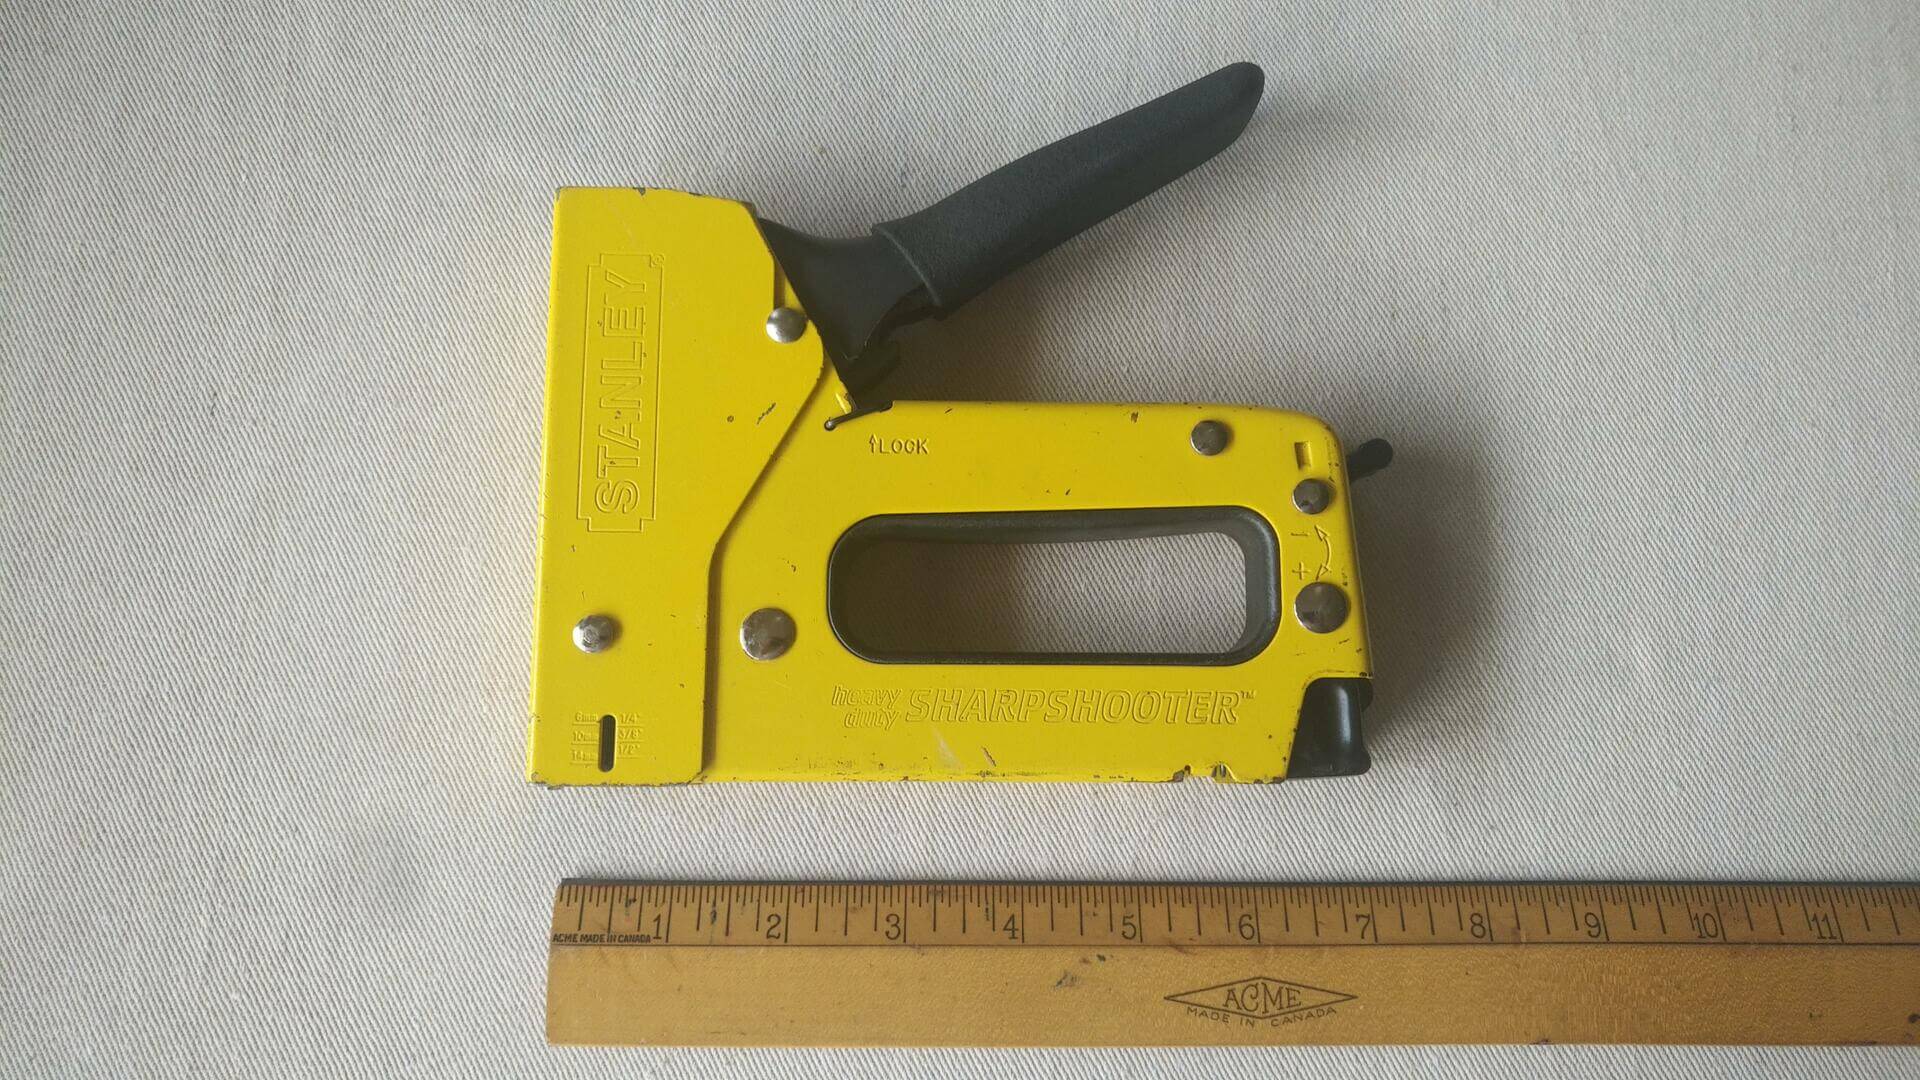 Rare vintage Stanley heavy duty Sharpshooter manual staple gun TR100 in yellow colour. Quality made in USA construction and upholstery nail and staple gun